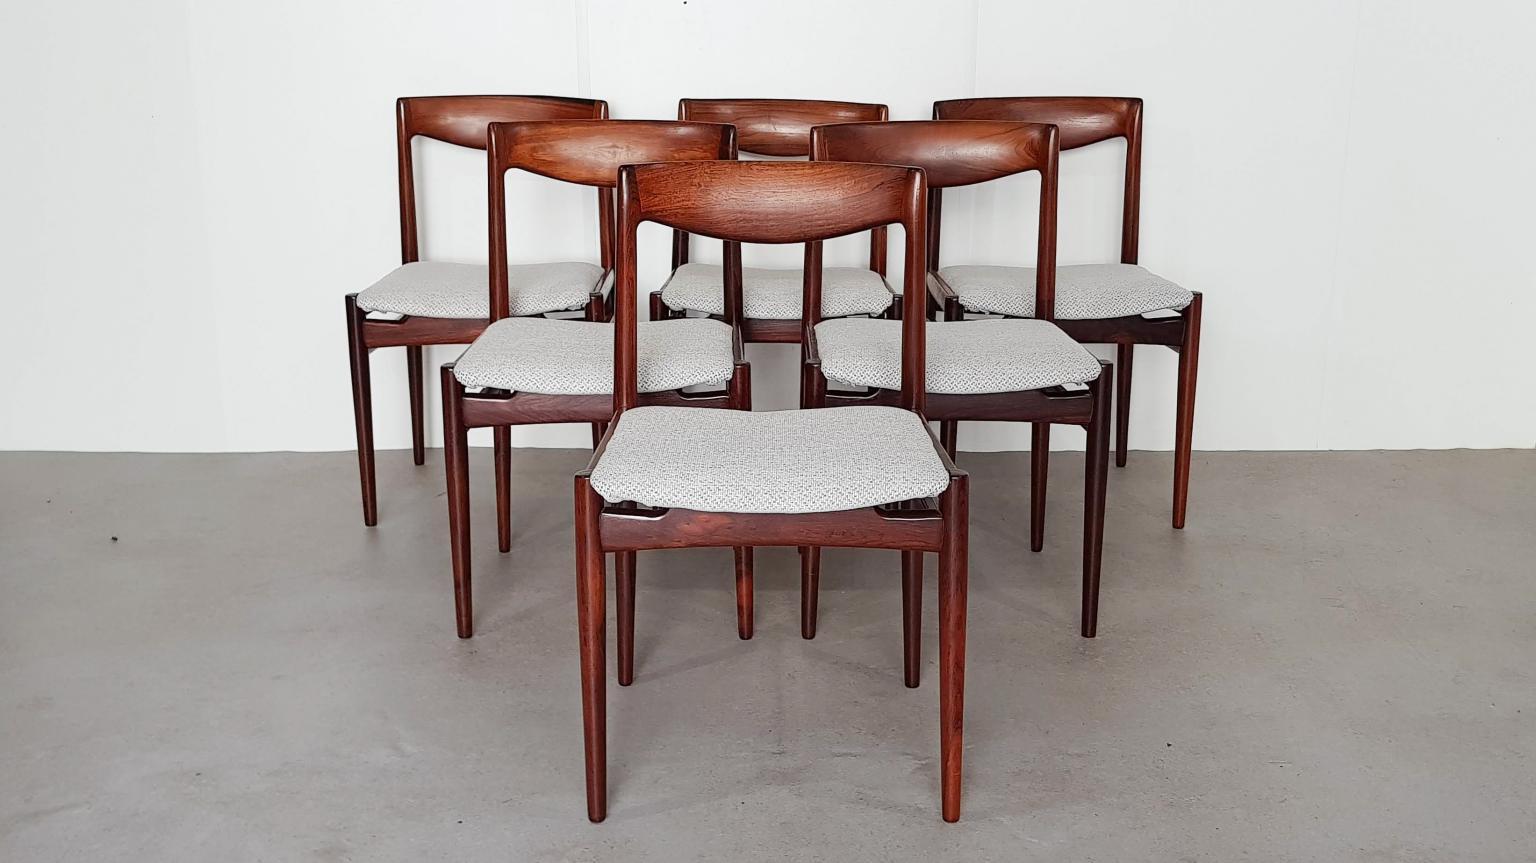 Set of six rosewood dining chairs by Lübke, Germany, 1960s.

In good condition with new grey-white upholstery.

Measures: Width: 48 cm

Depth: 50 cm, seating 43 cm

Height: 78 cm; seating 46 cm.